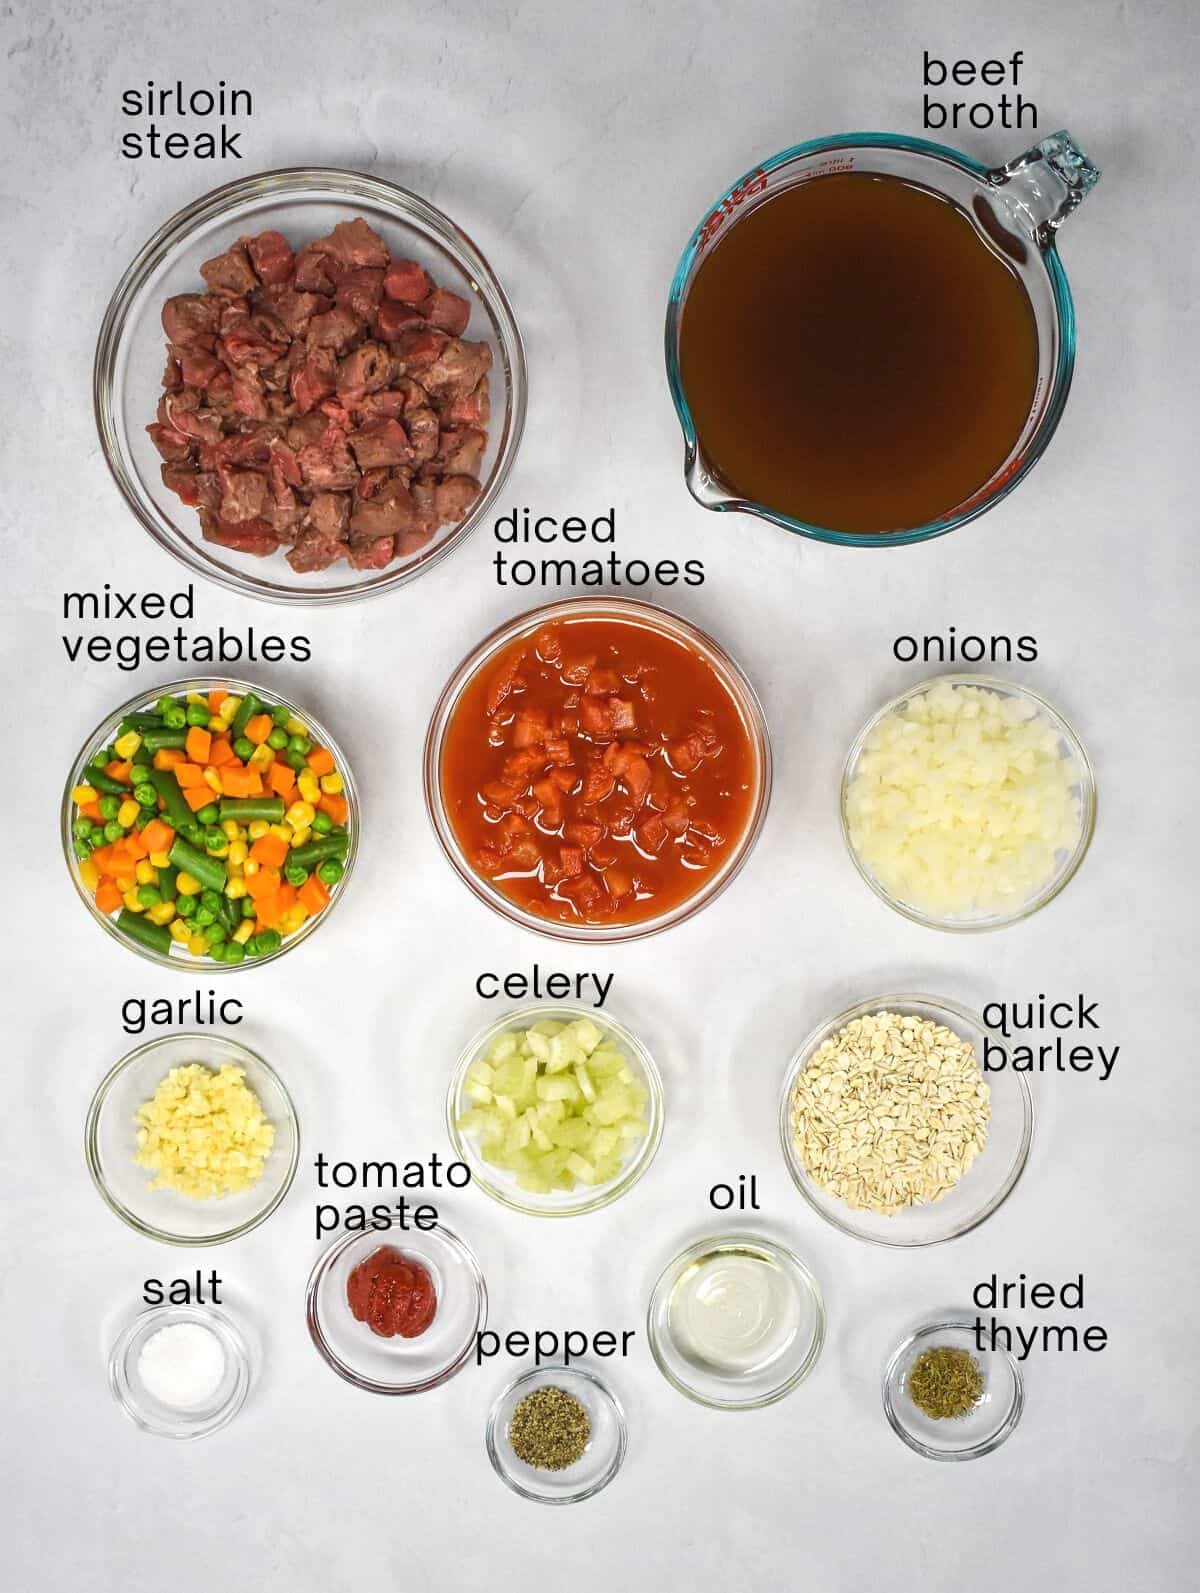 The ingredients for the beef barley soup prepped and arranged in glass bowls on a white table. Each ingredient is labeled with small black letters.